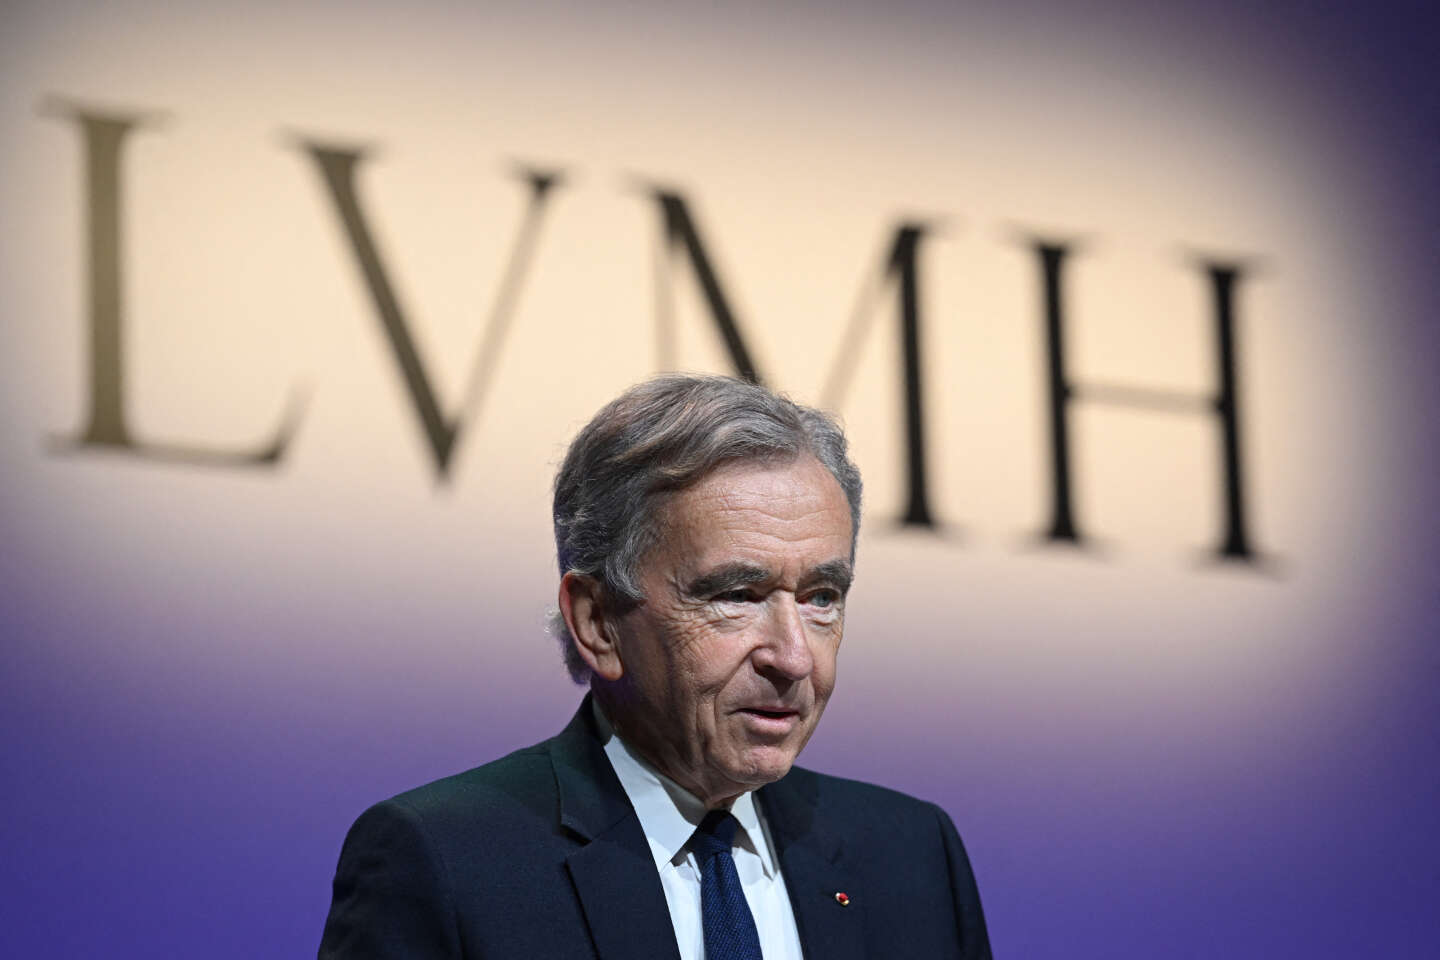 LVMH's resilience gives luxury shares a boost amid economic gloom